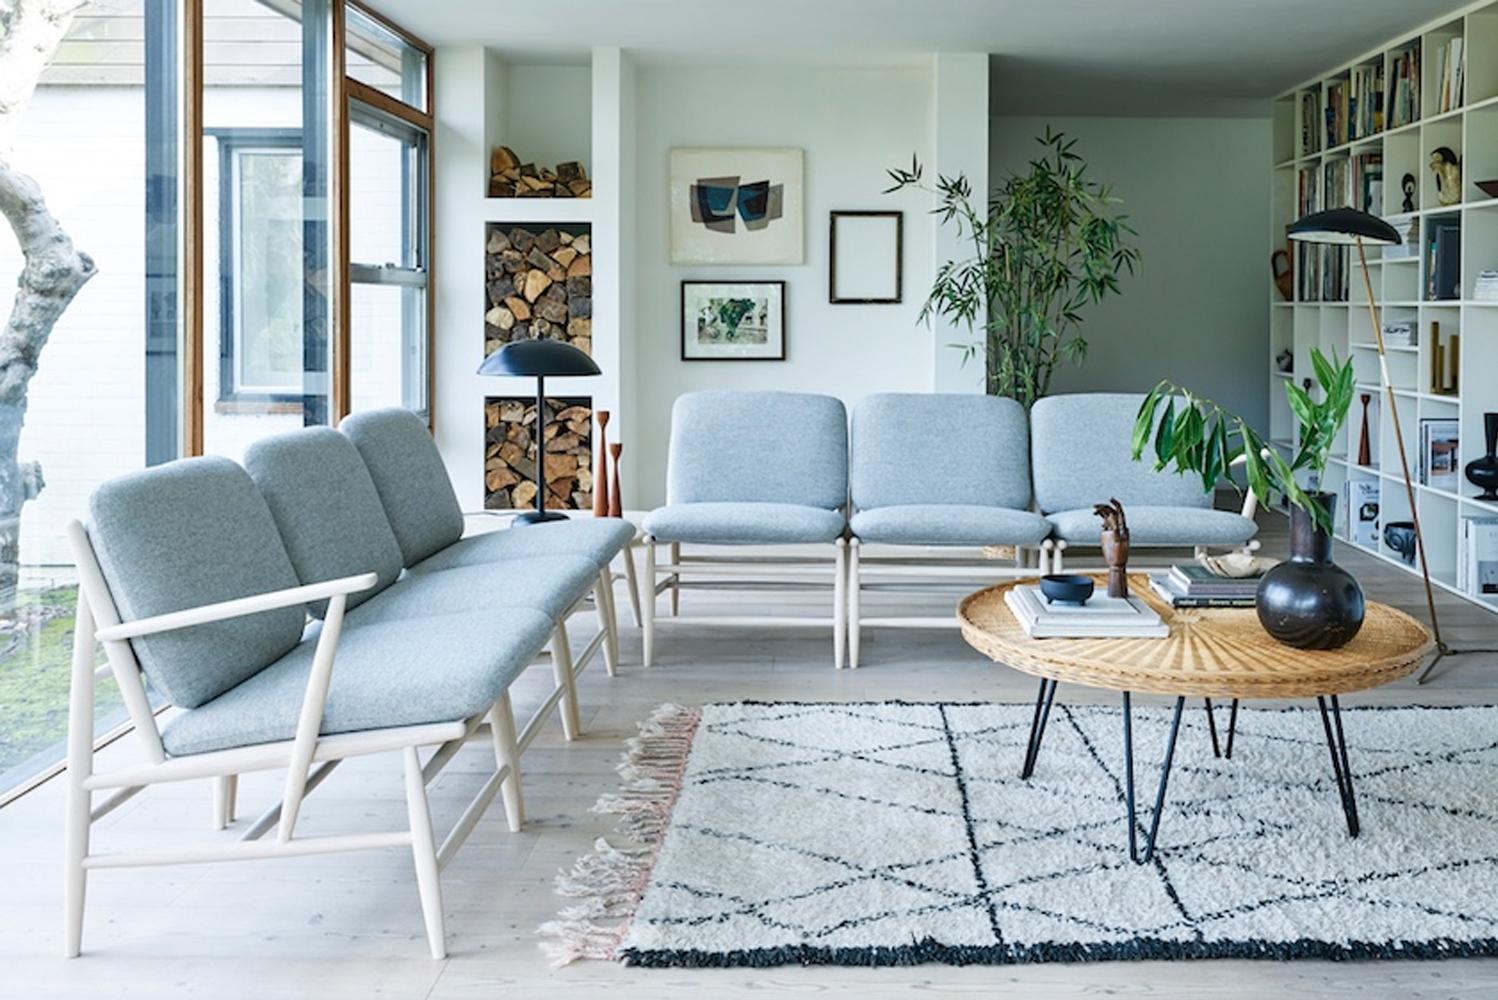 Introducing VON the first collection by British brand Ercol 